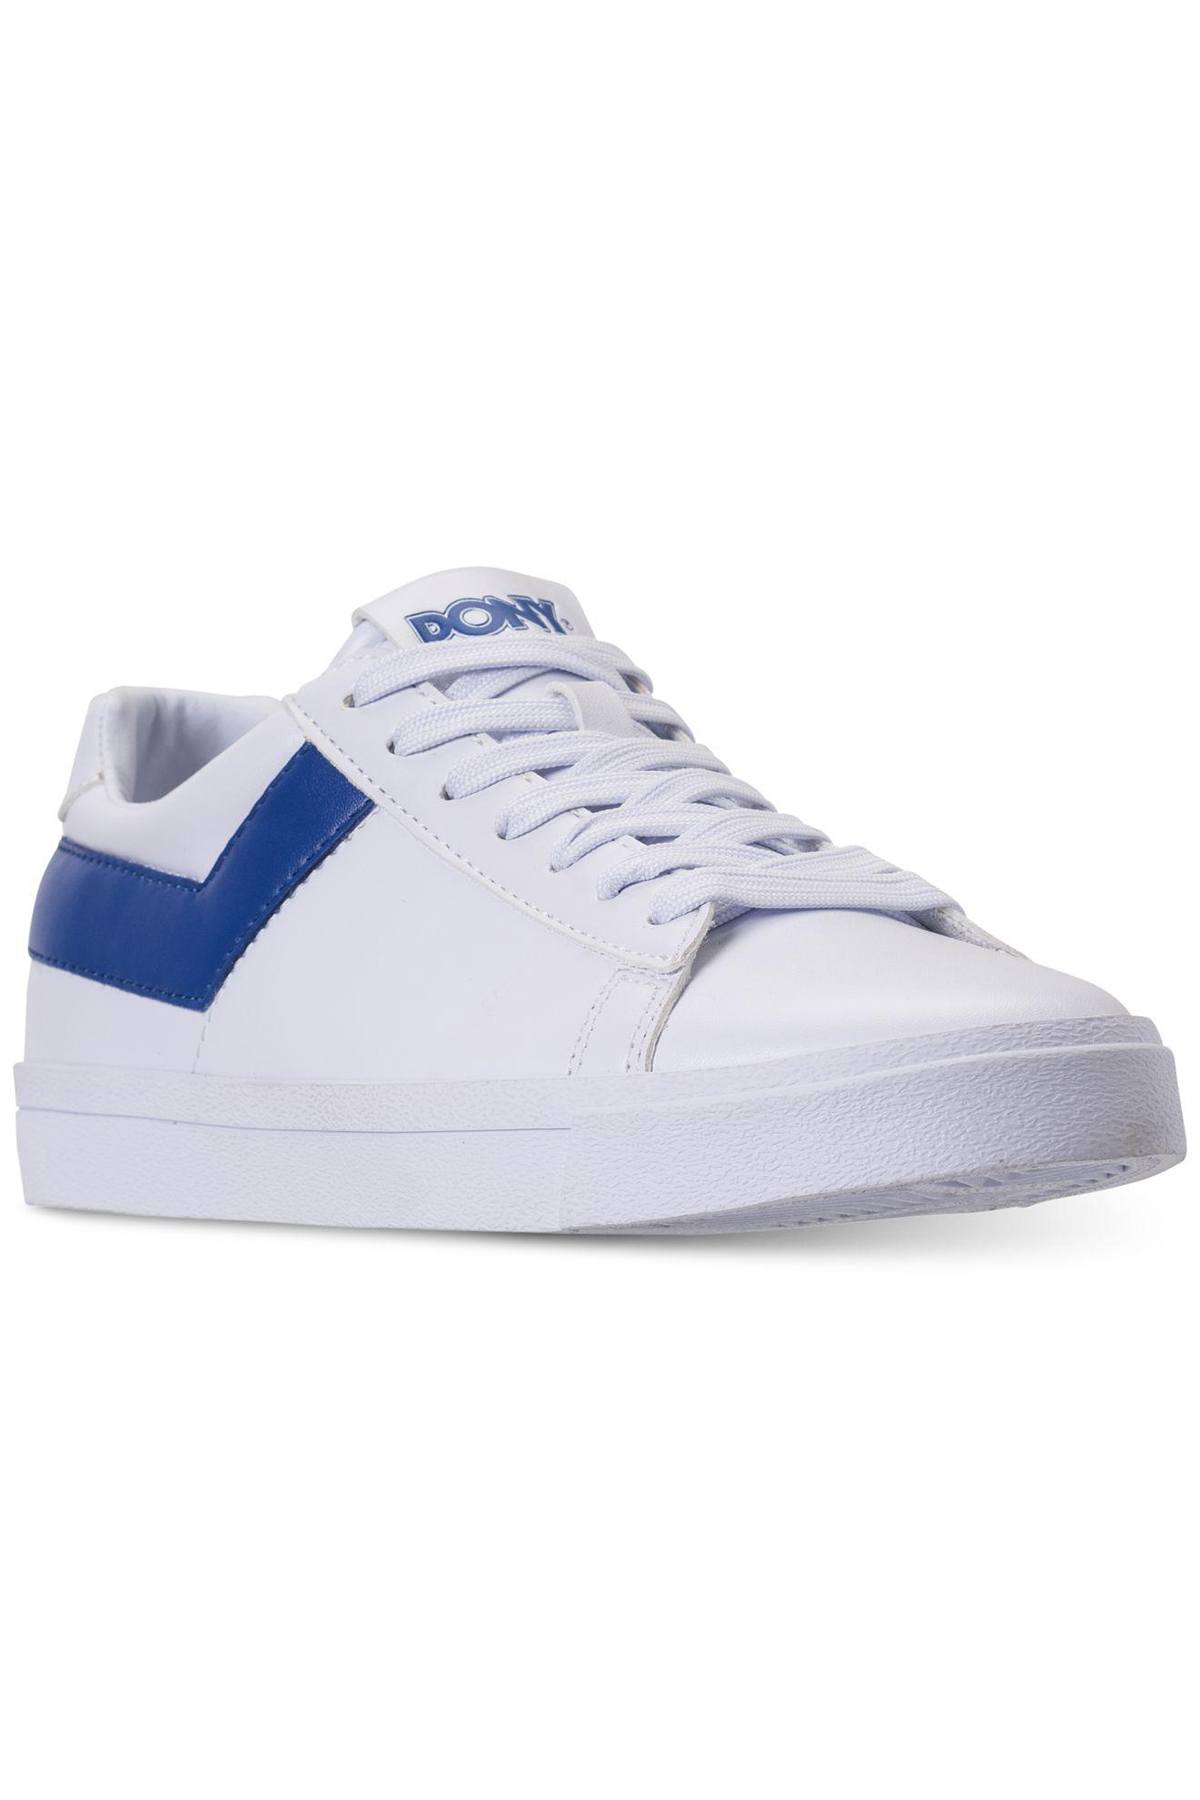 Pony White/Royal Top-Star Lo Core Sneakers